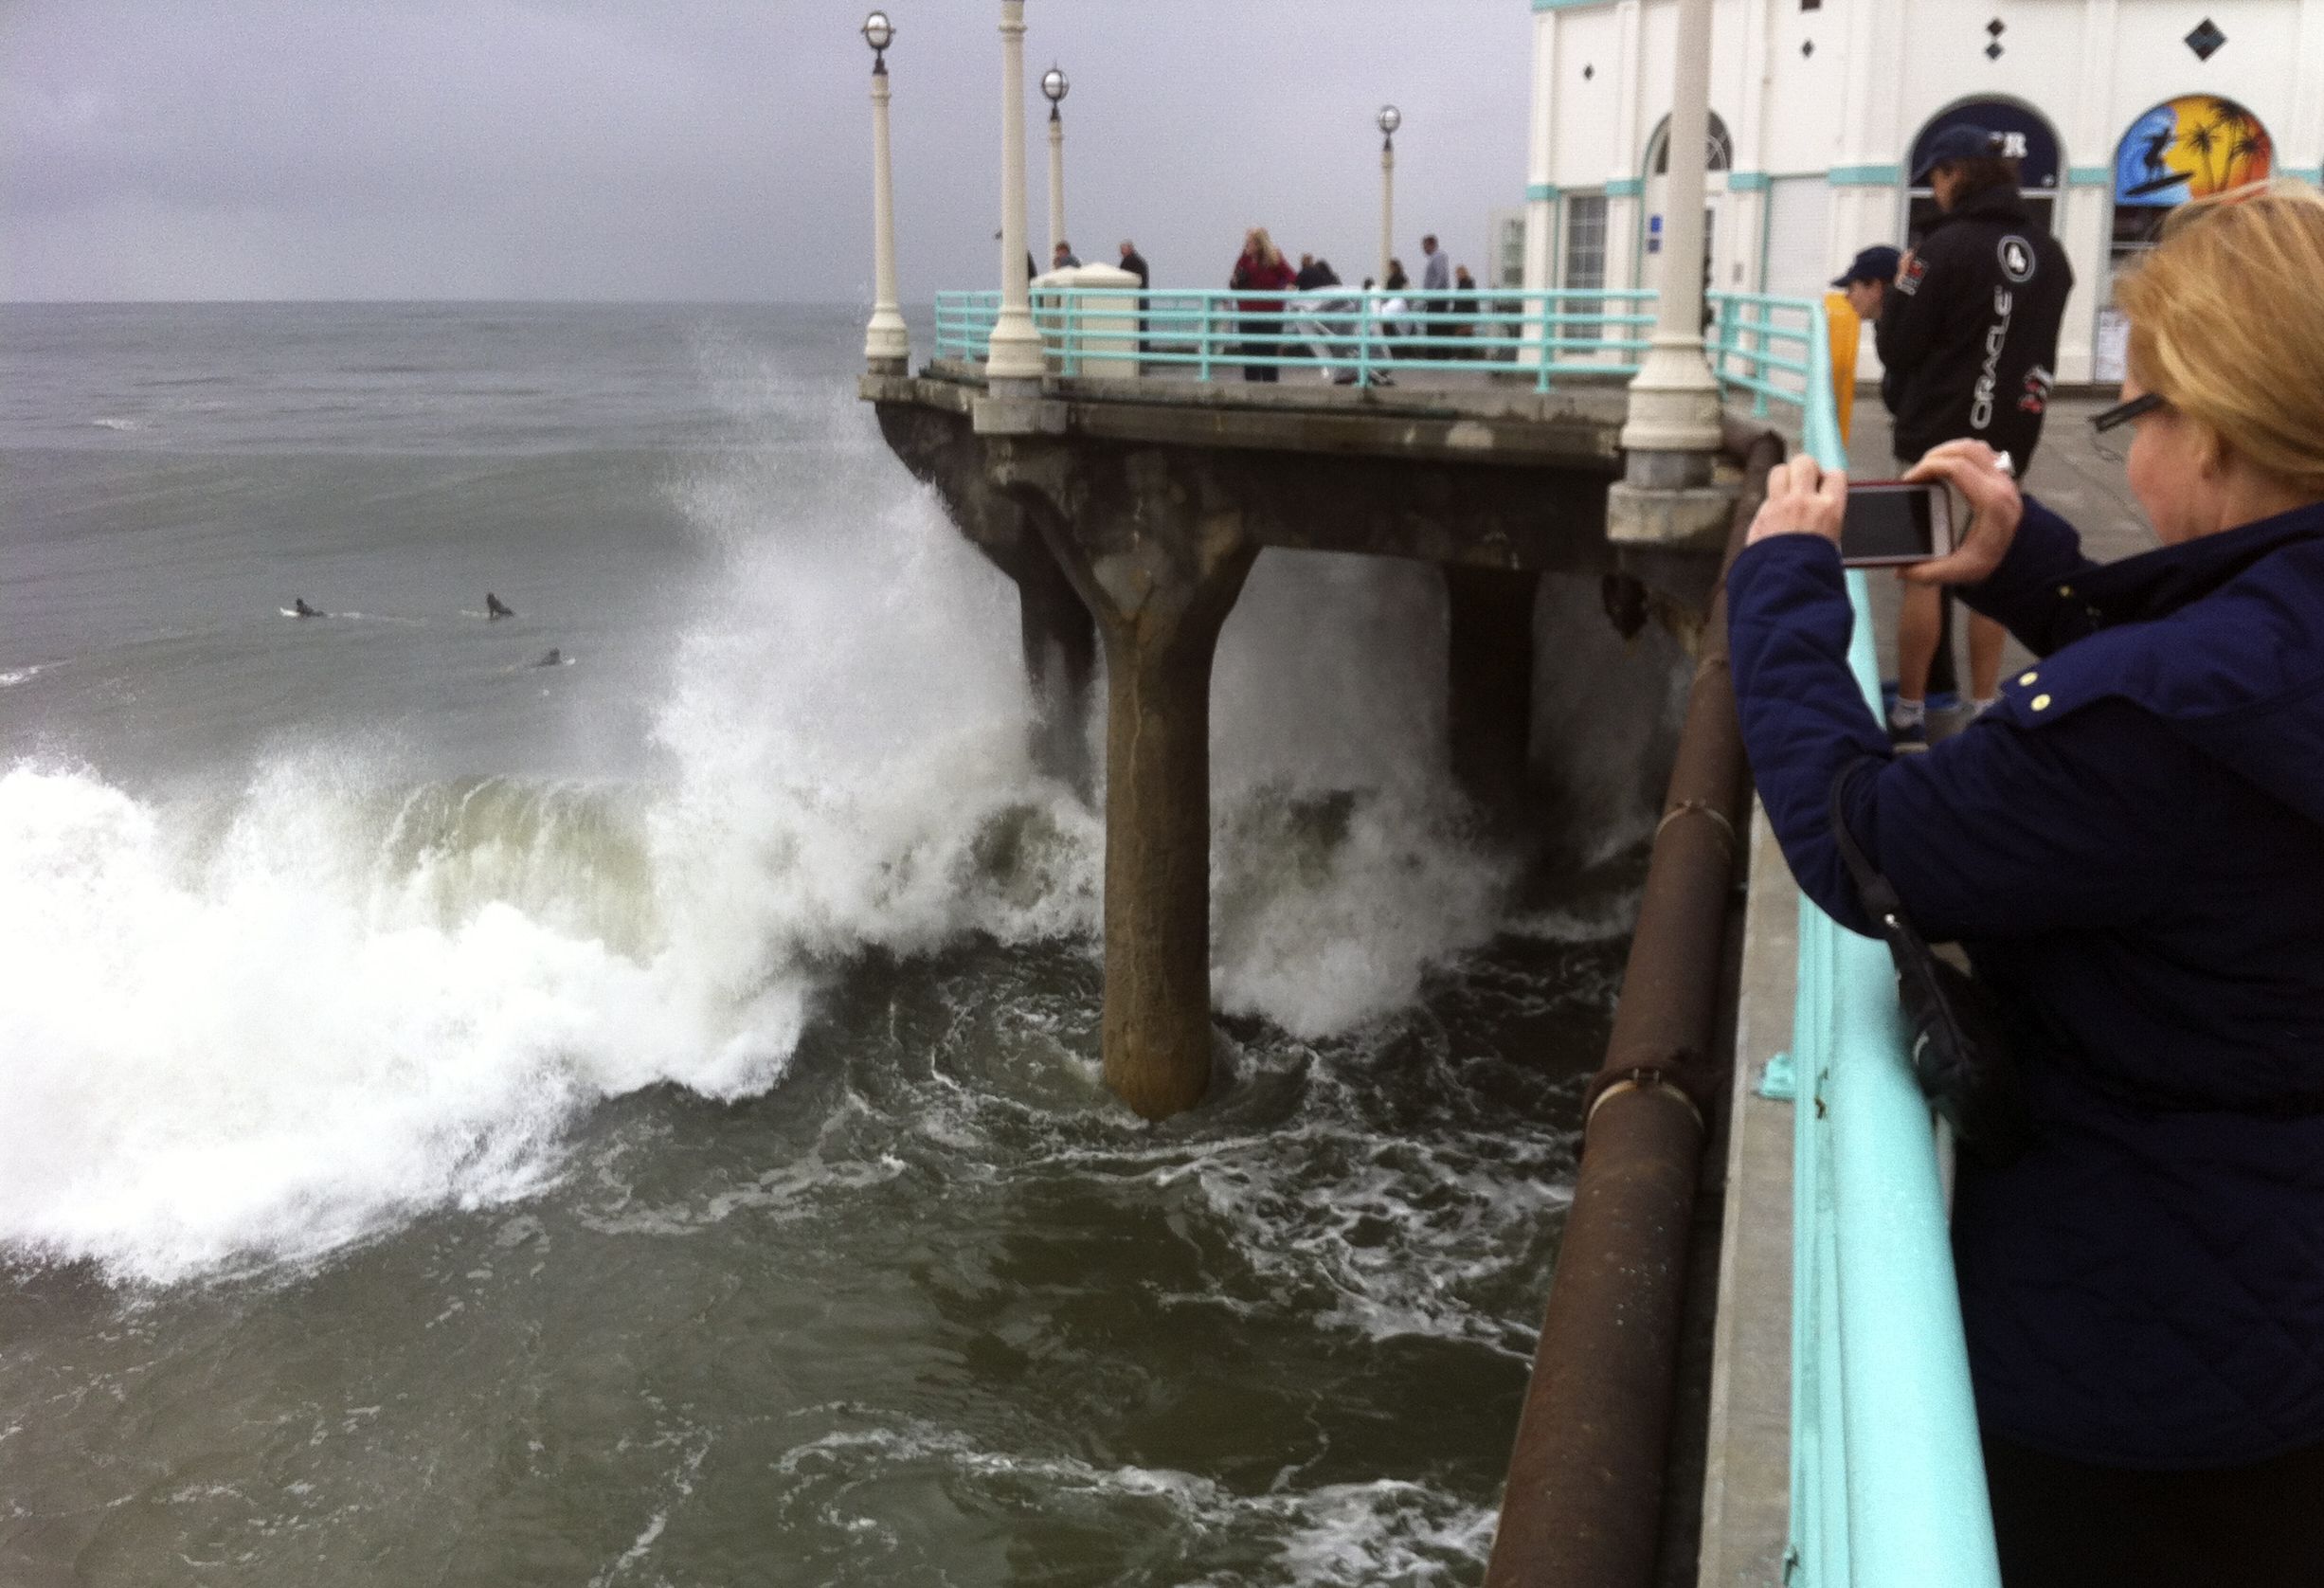 Big surf pounds the pier Sunday at Manhattan Beach, Calif., in the aftermath of a powerful storm.